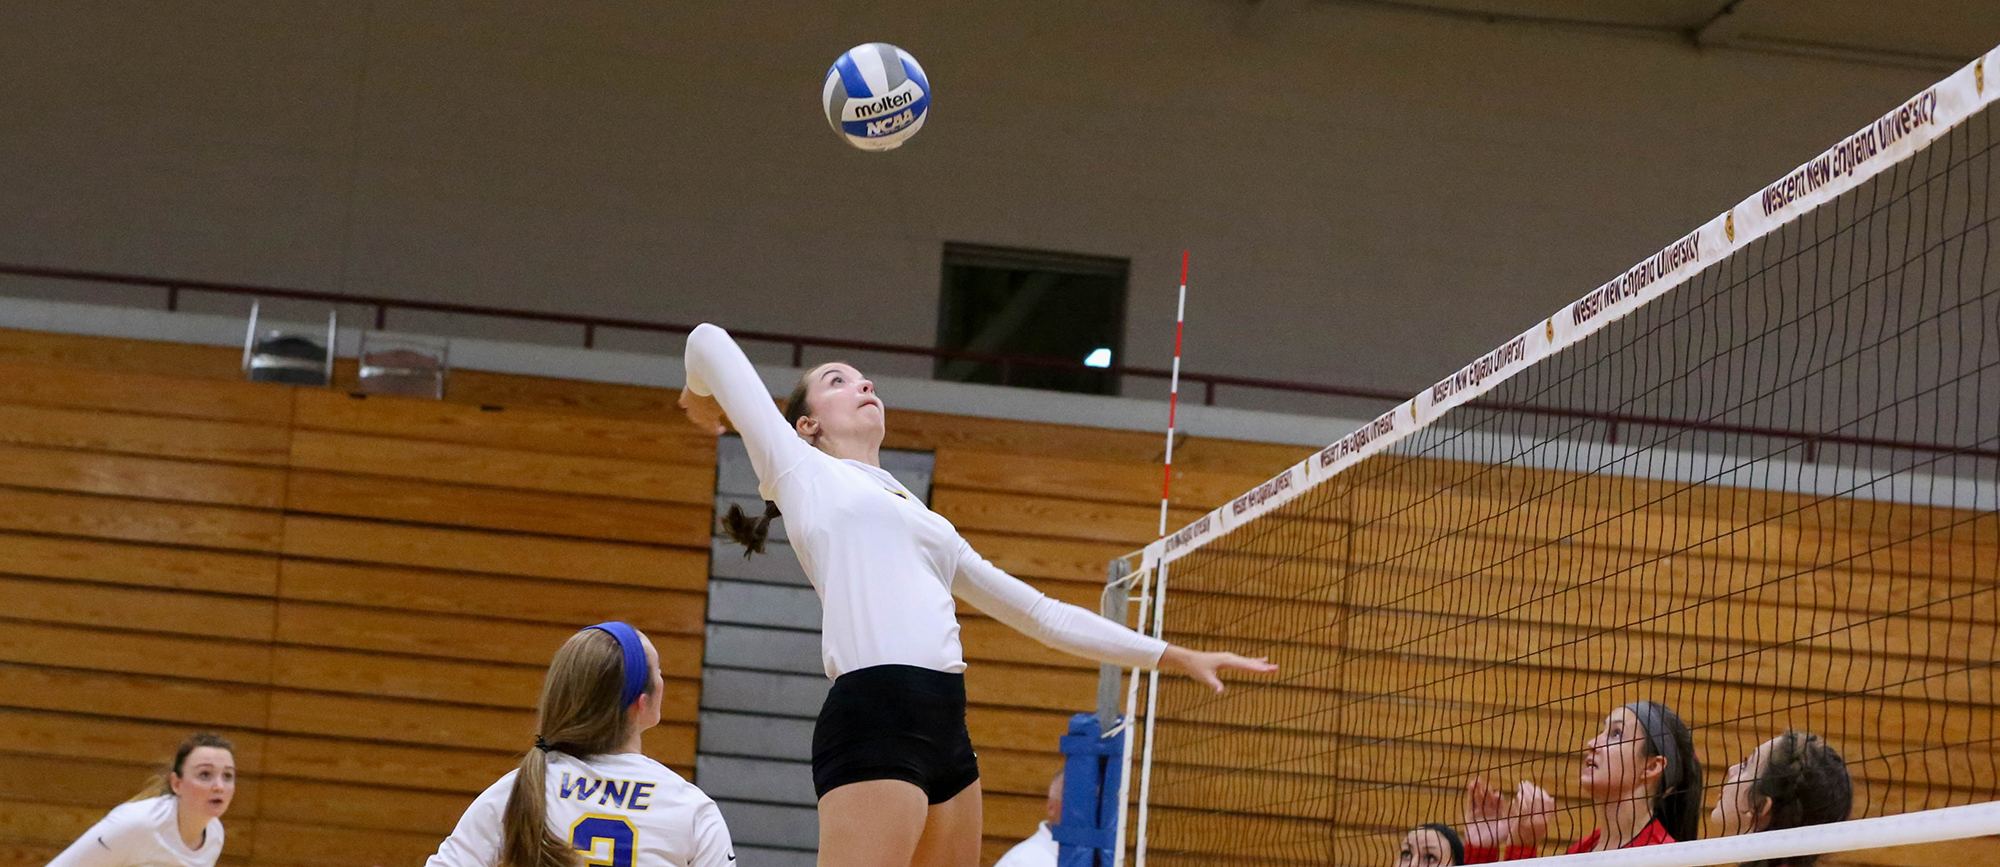 Roger Williams Tops Western New England 3-0 in CCC Play